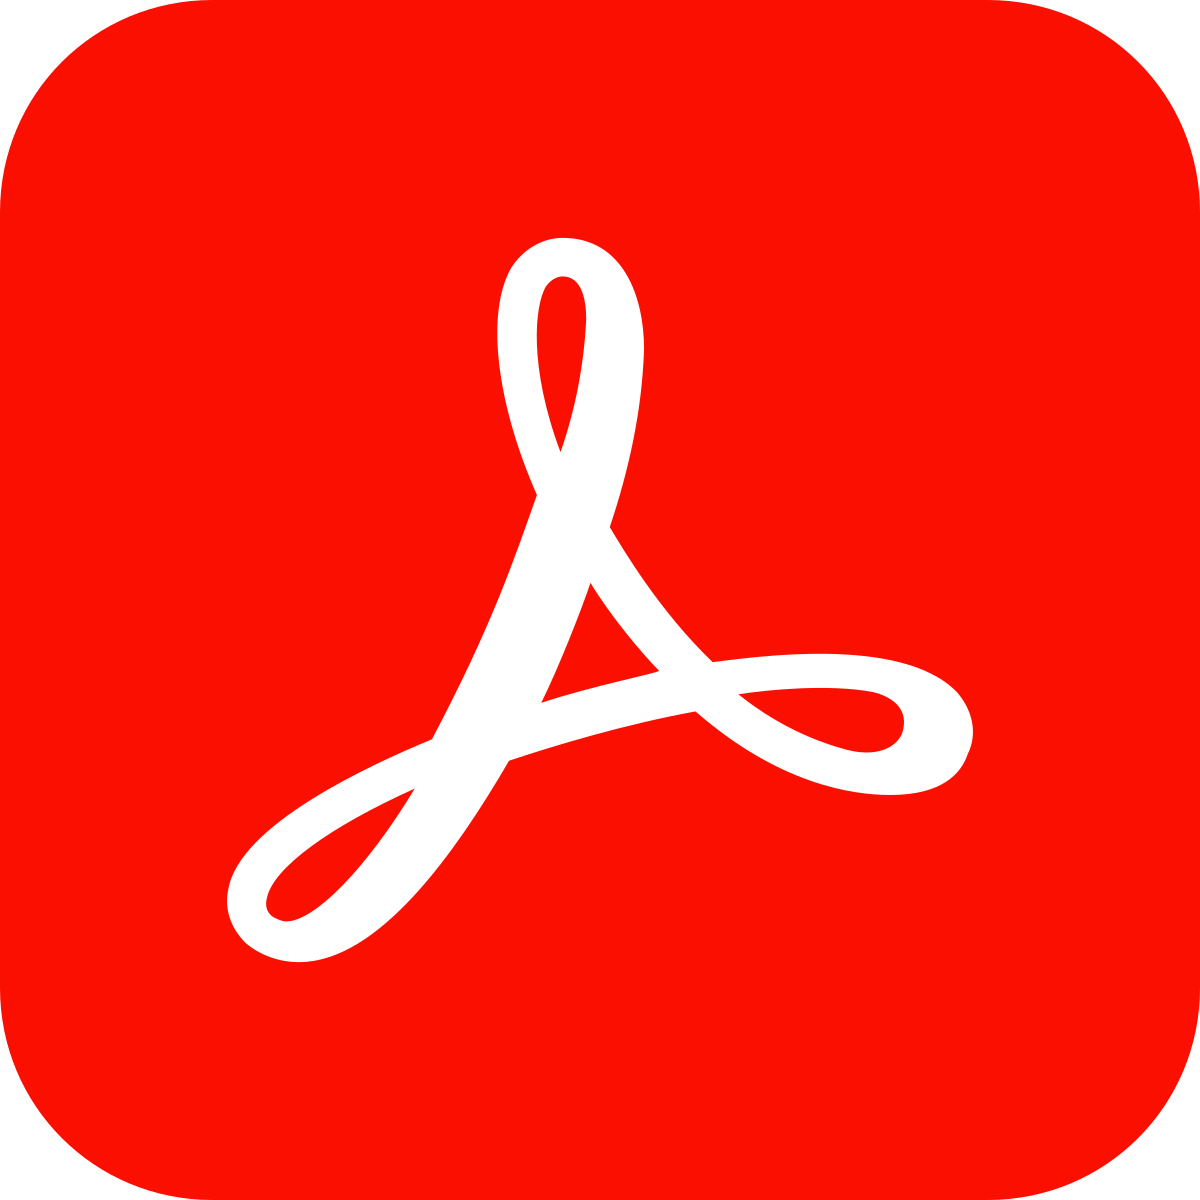 End any Adobe Acrobat Reader processes running in the background
Download the latest version of Adobe Acrobat Reader from the official website